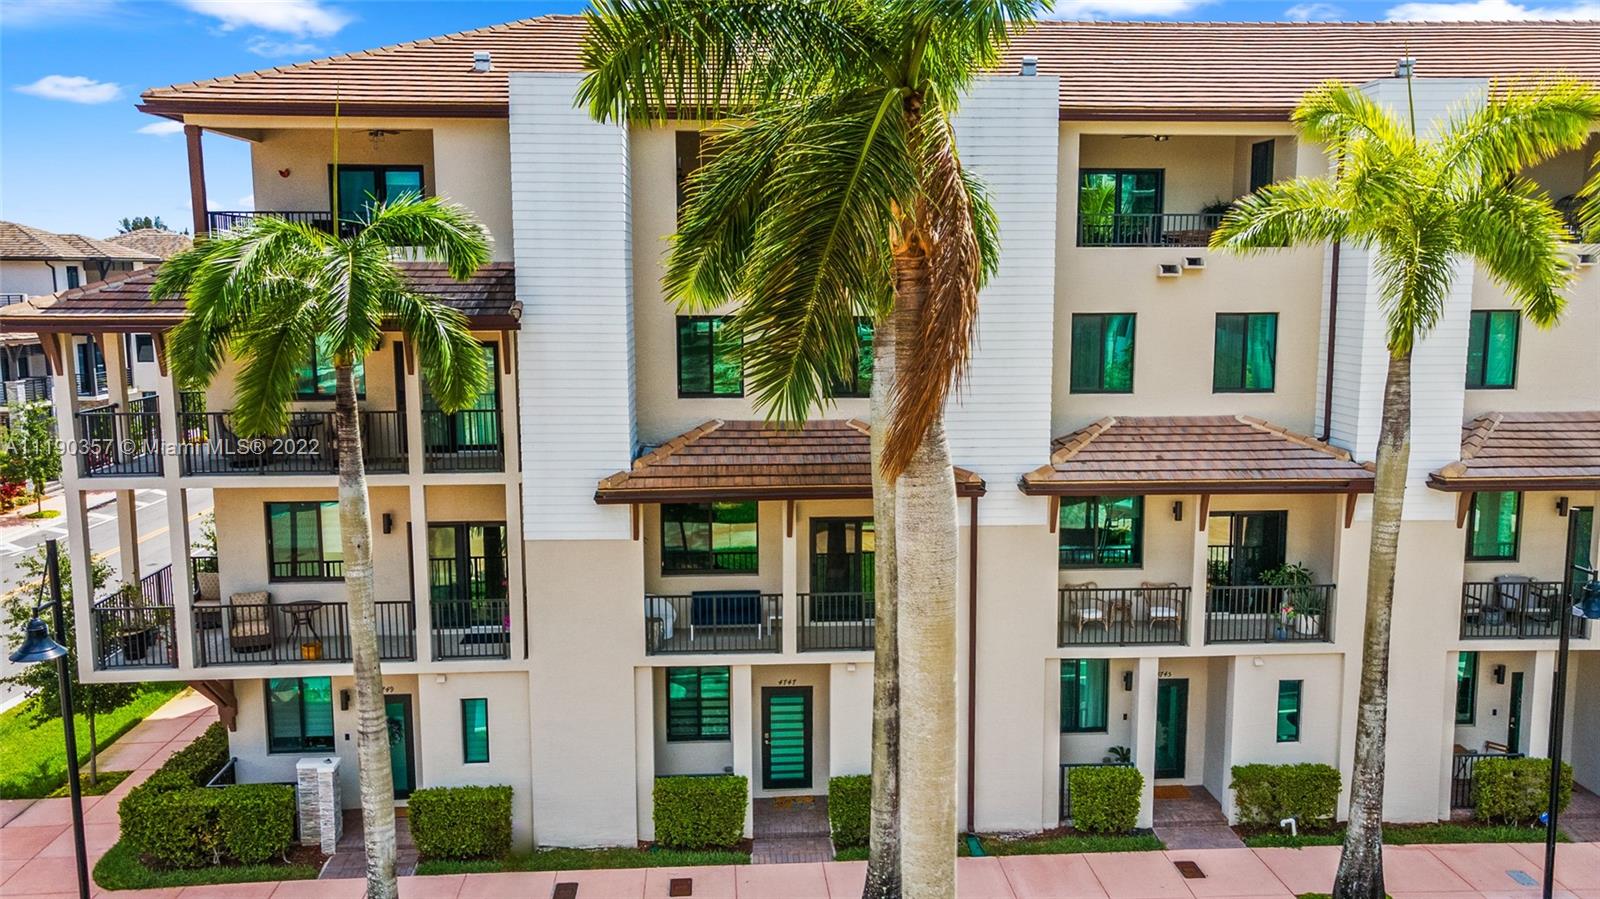 Modern resort style 4 story /townhome in Urbana of Downtown Doral. Close to restaurants and parks. Its like being on vacation. Amenities include a Clubhouse with a fitness center, pool and much more. 3 Bedrooms 3 Baths 2 1/2